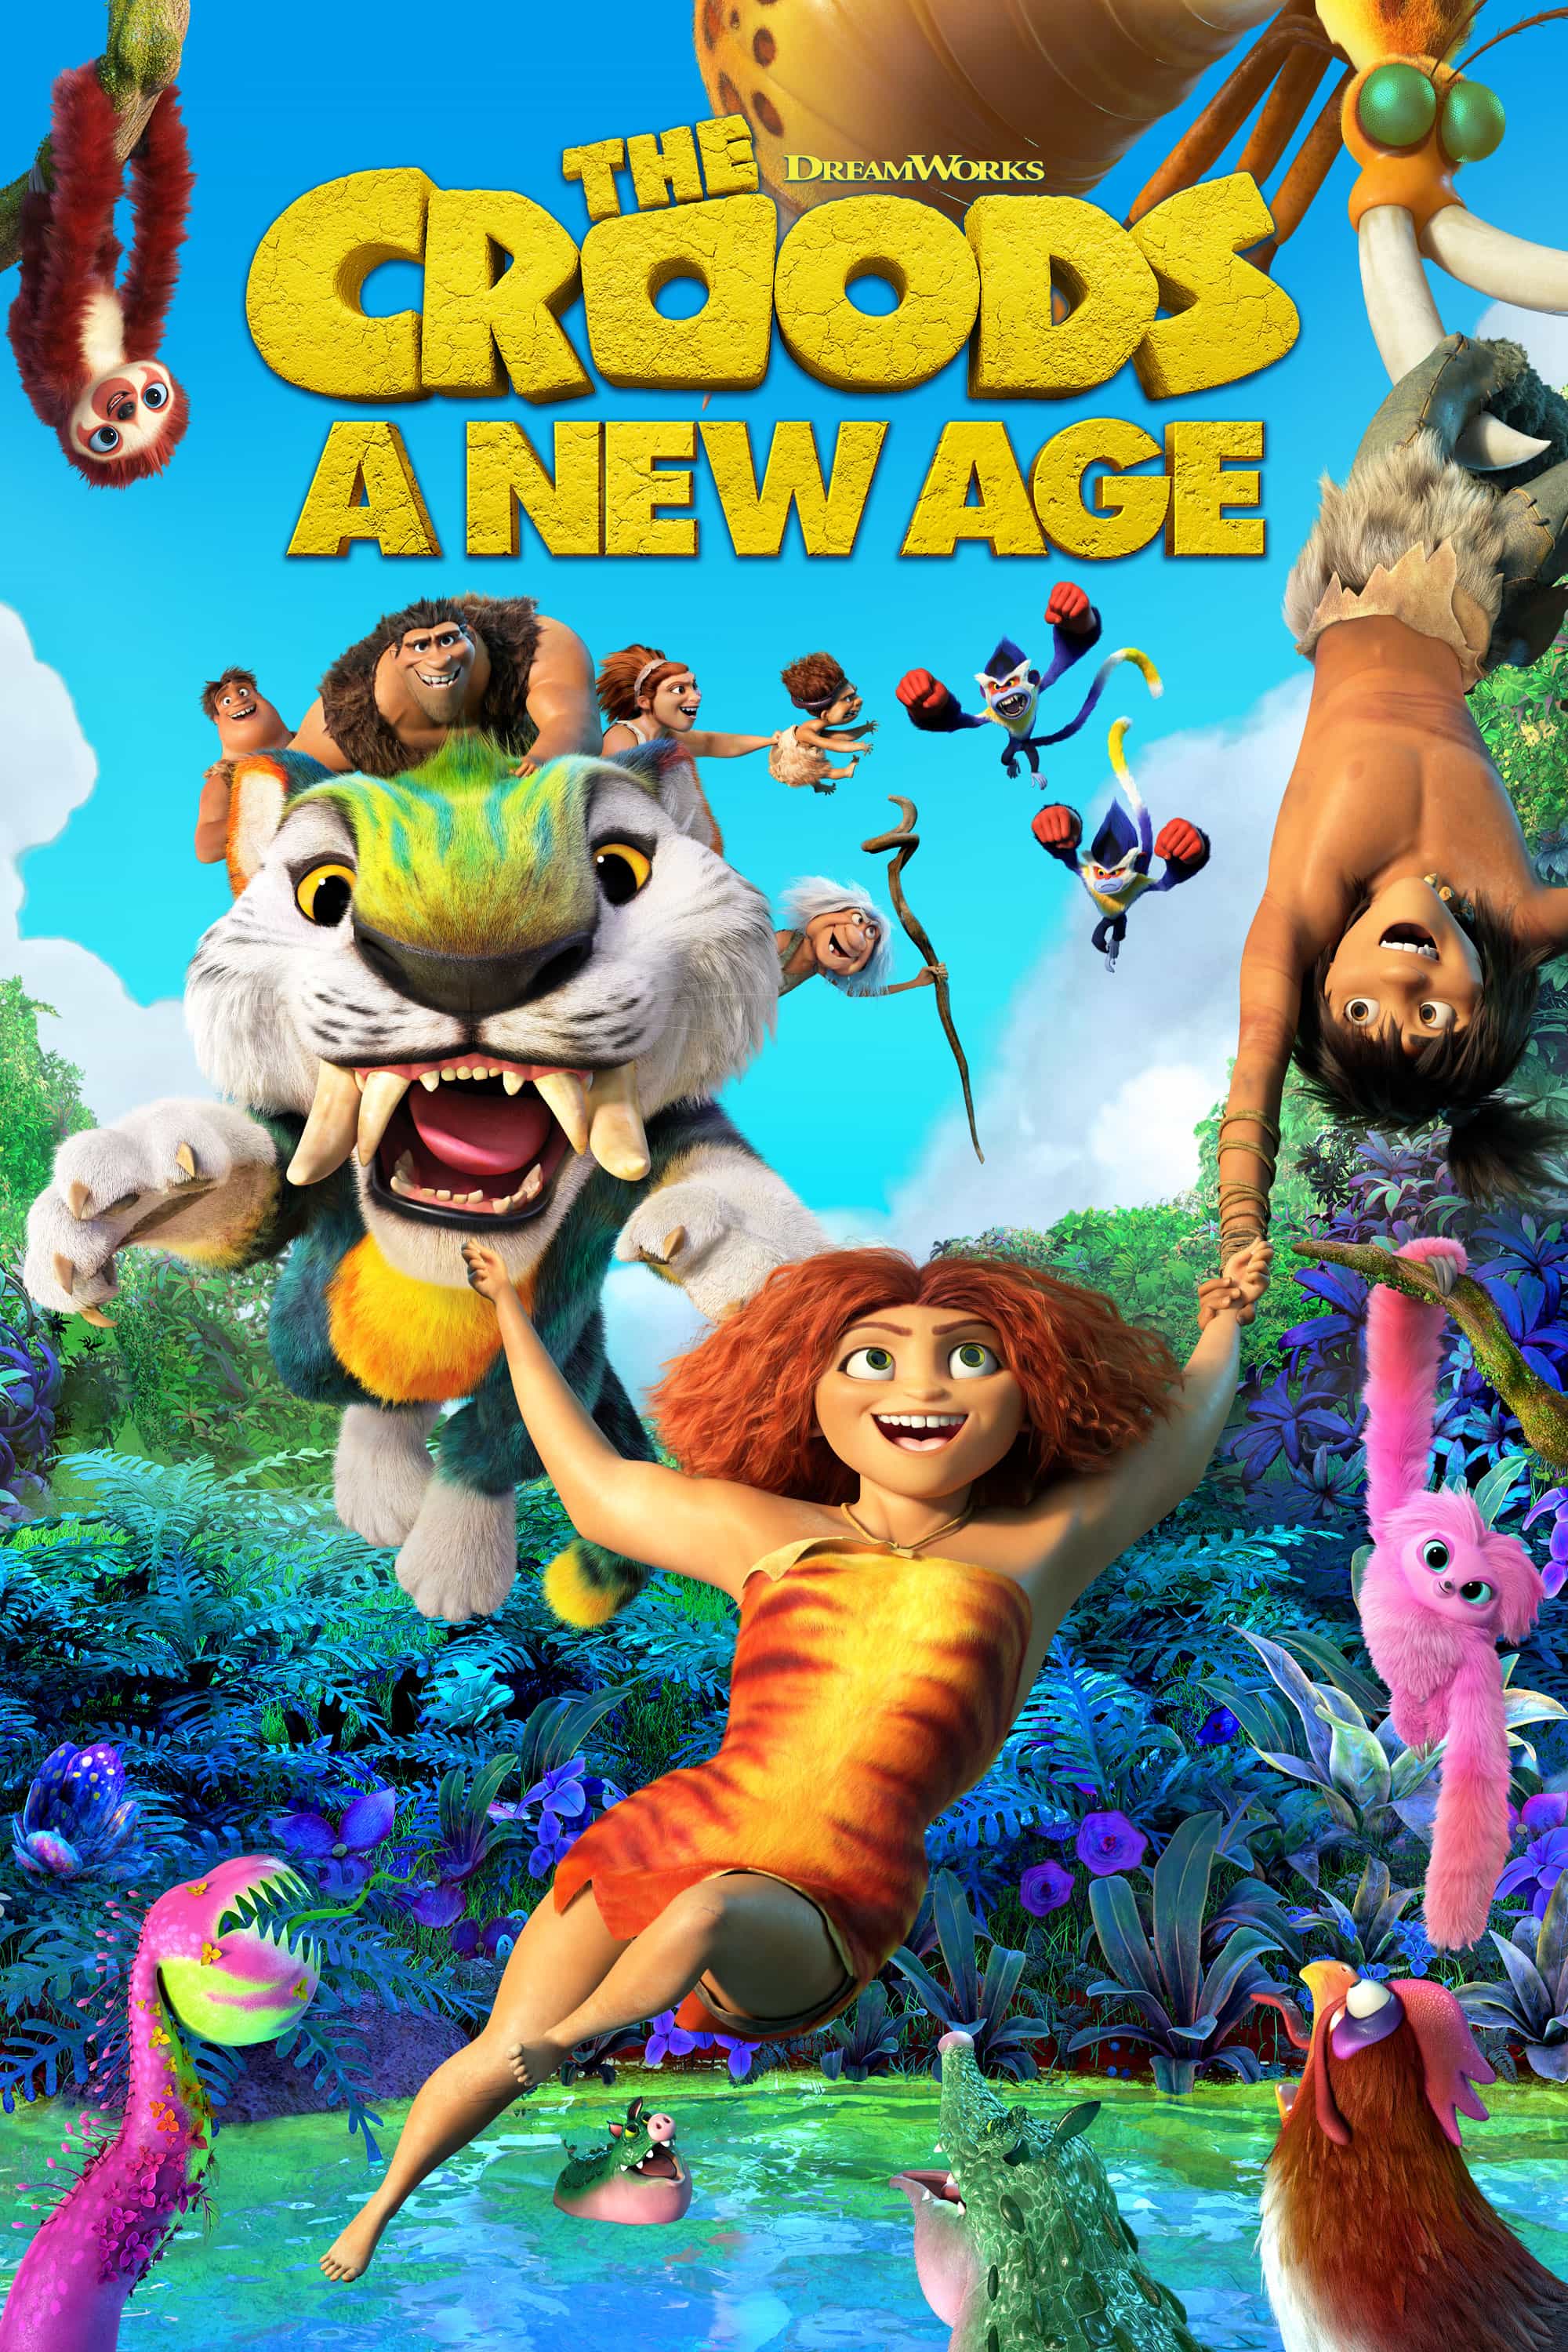 First trailer for sequel movie Croods: A New Age starring Nicolas Cage